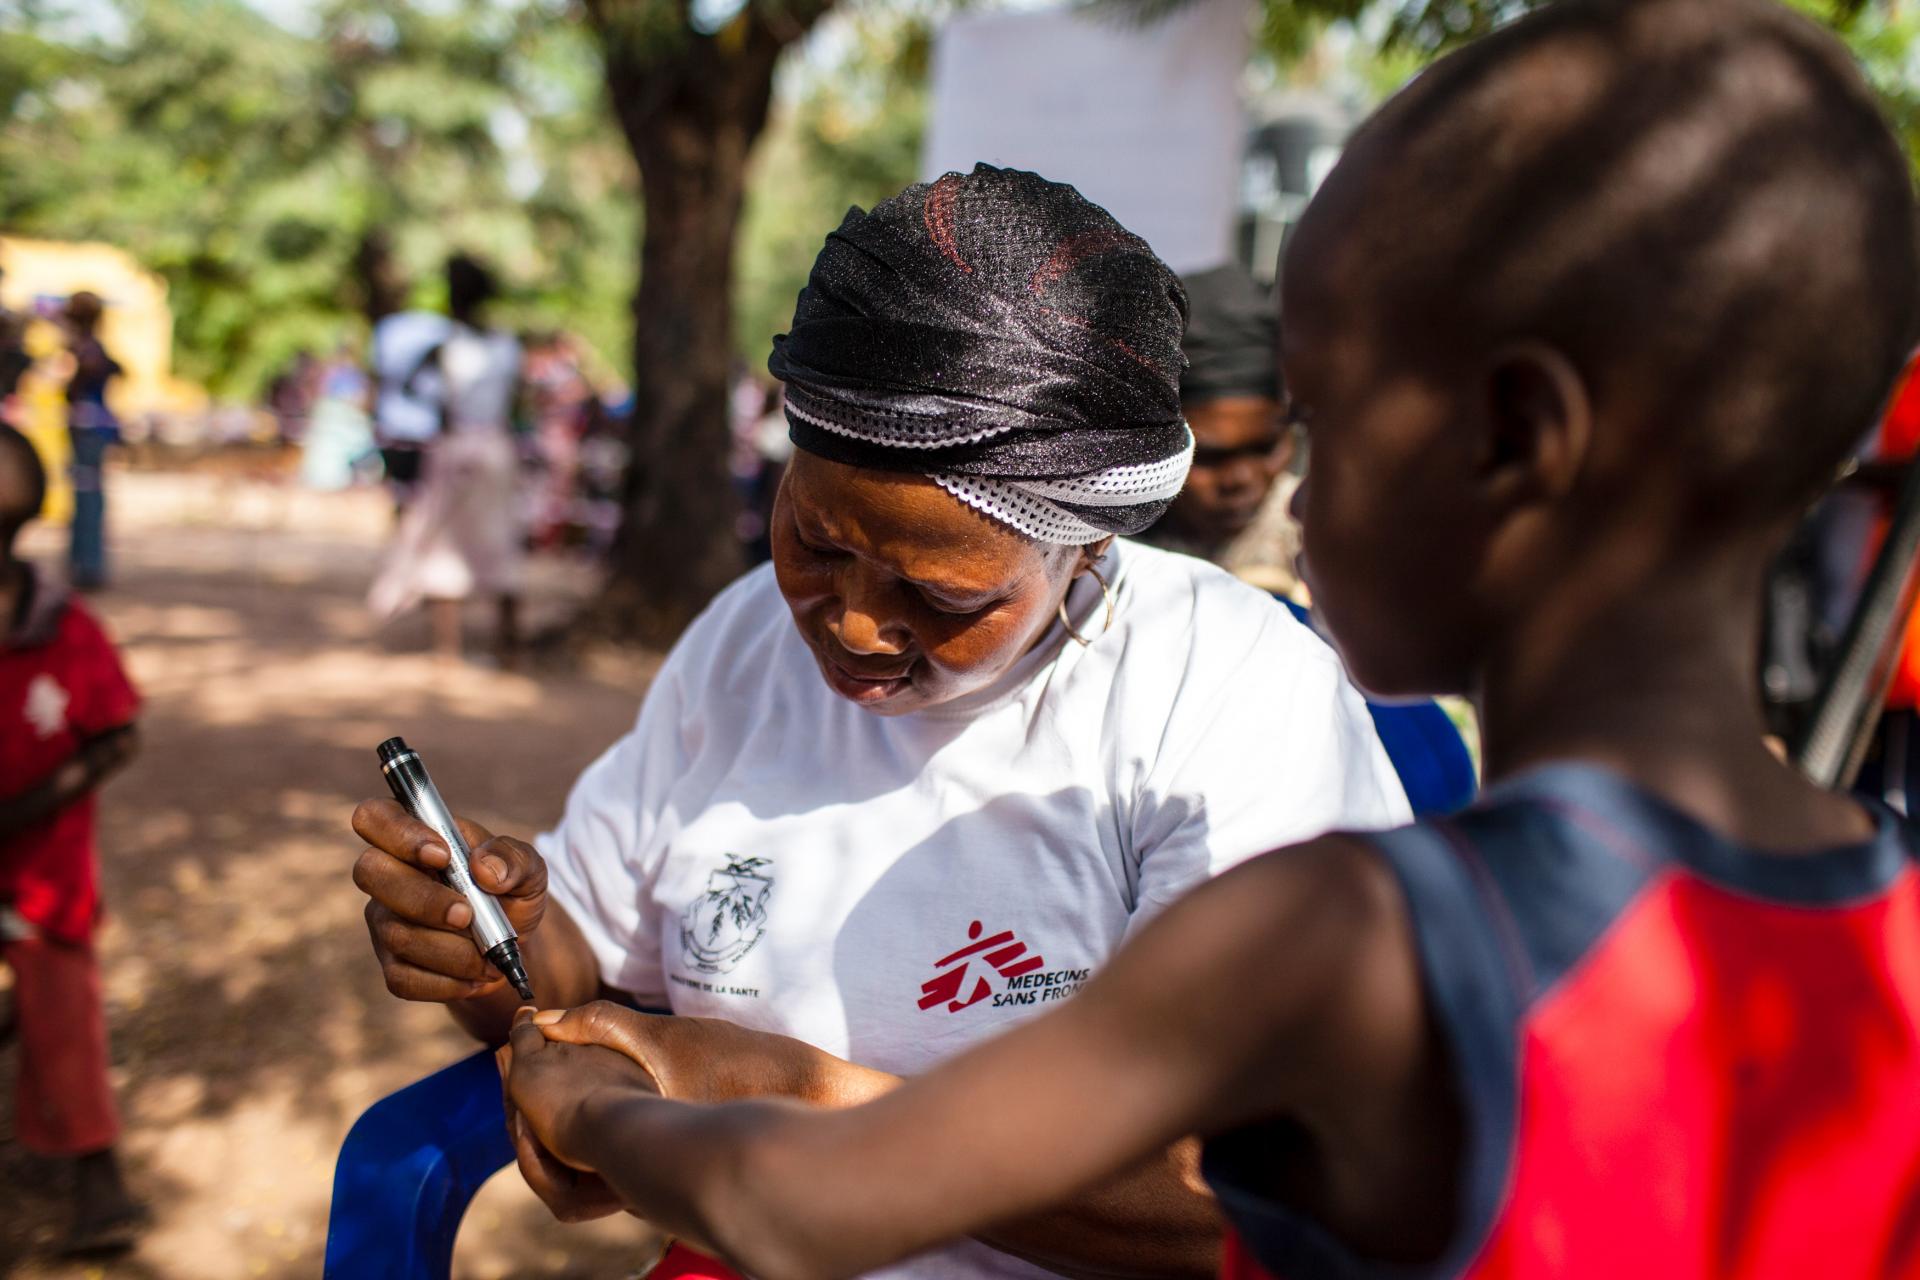 A picture of an MSF team member marking a vaccinated girl during a vaccination day